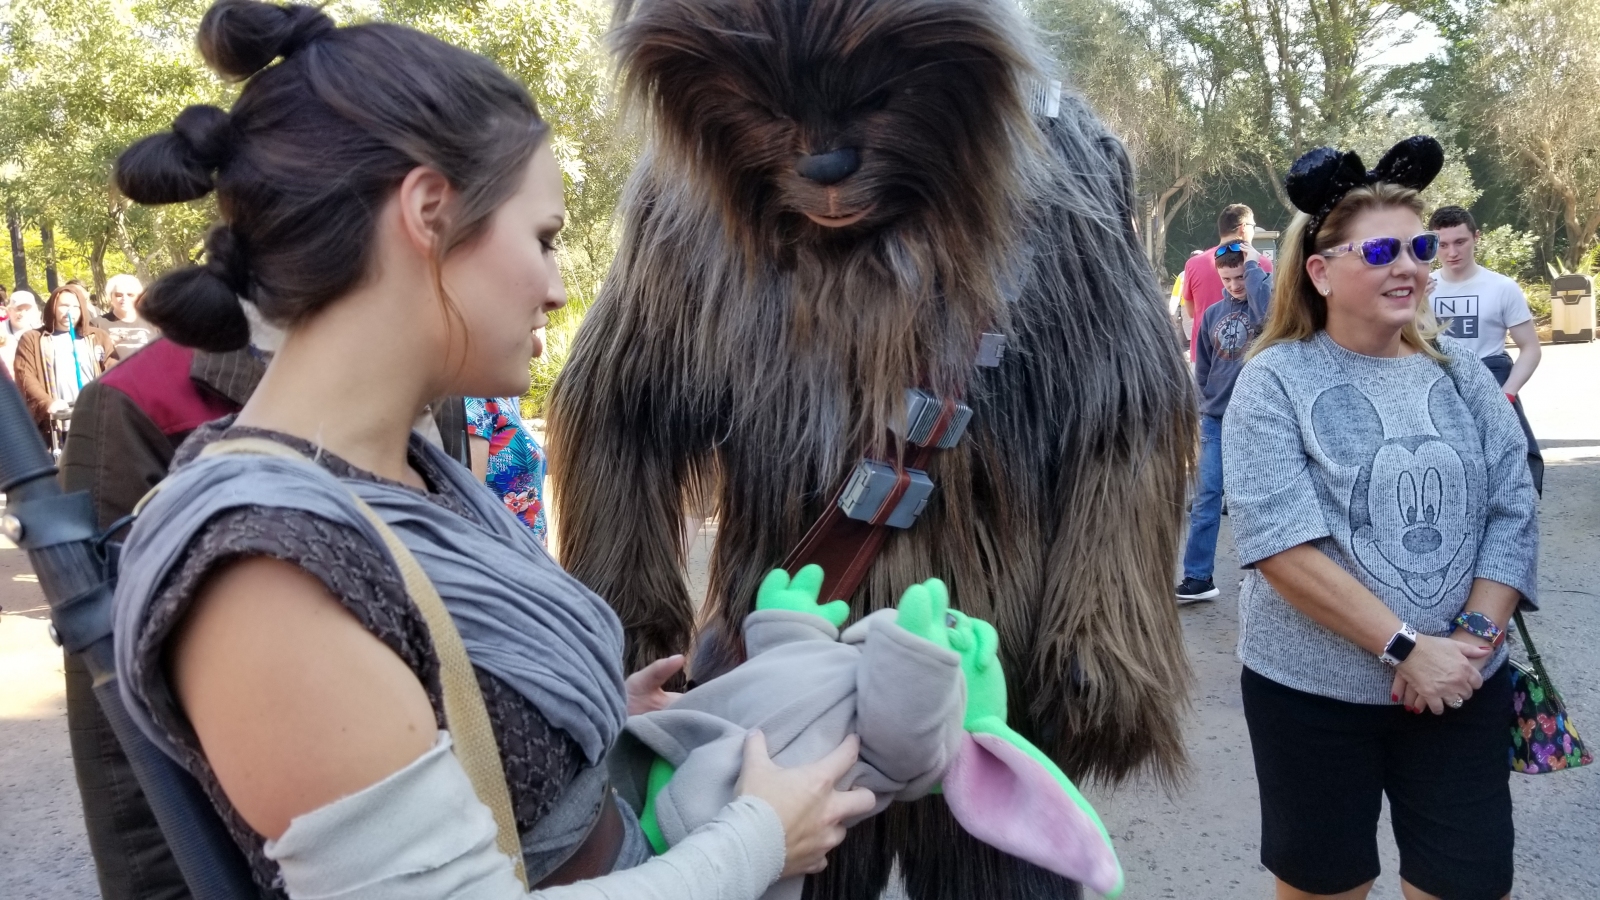 Rey and Chewbacca at Galaxy's Edge Hollywood Studios